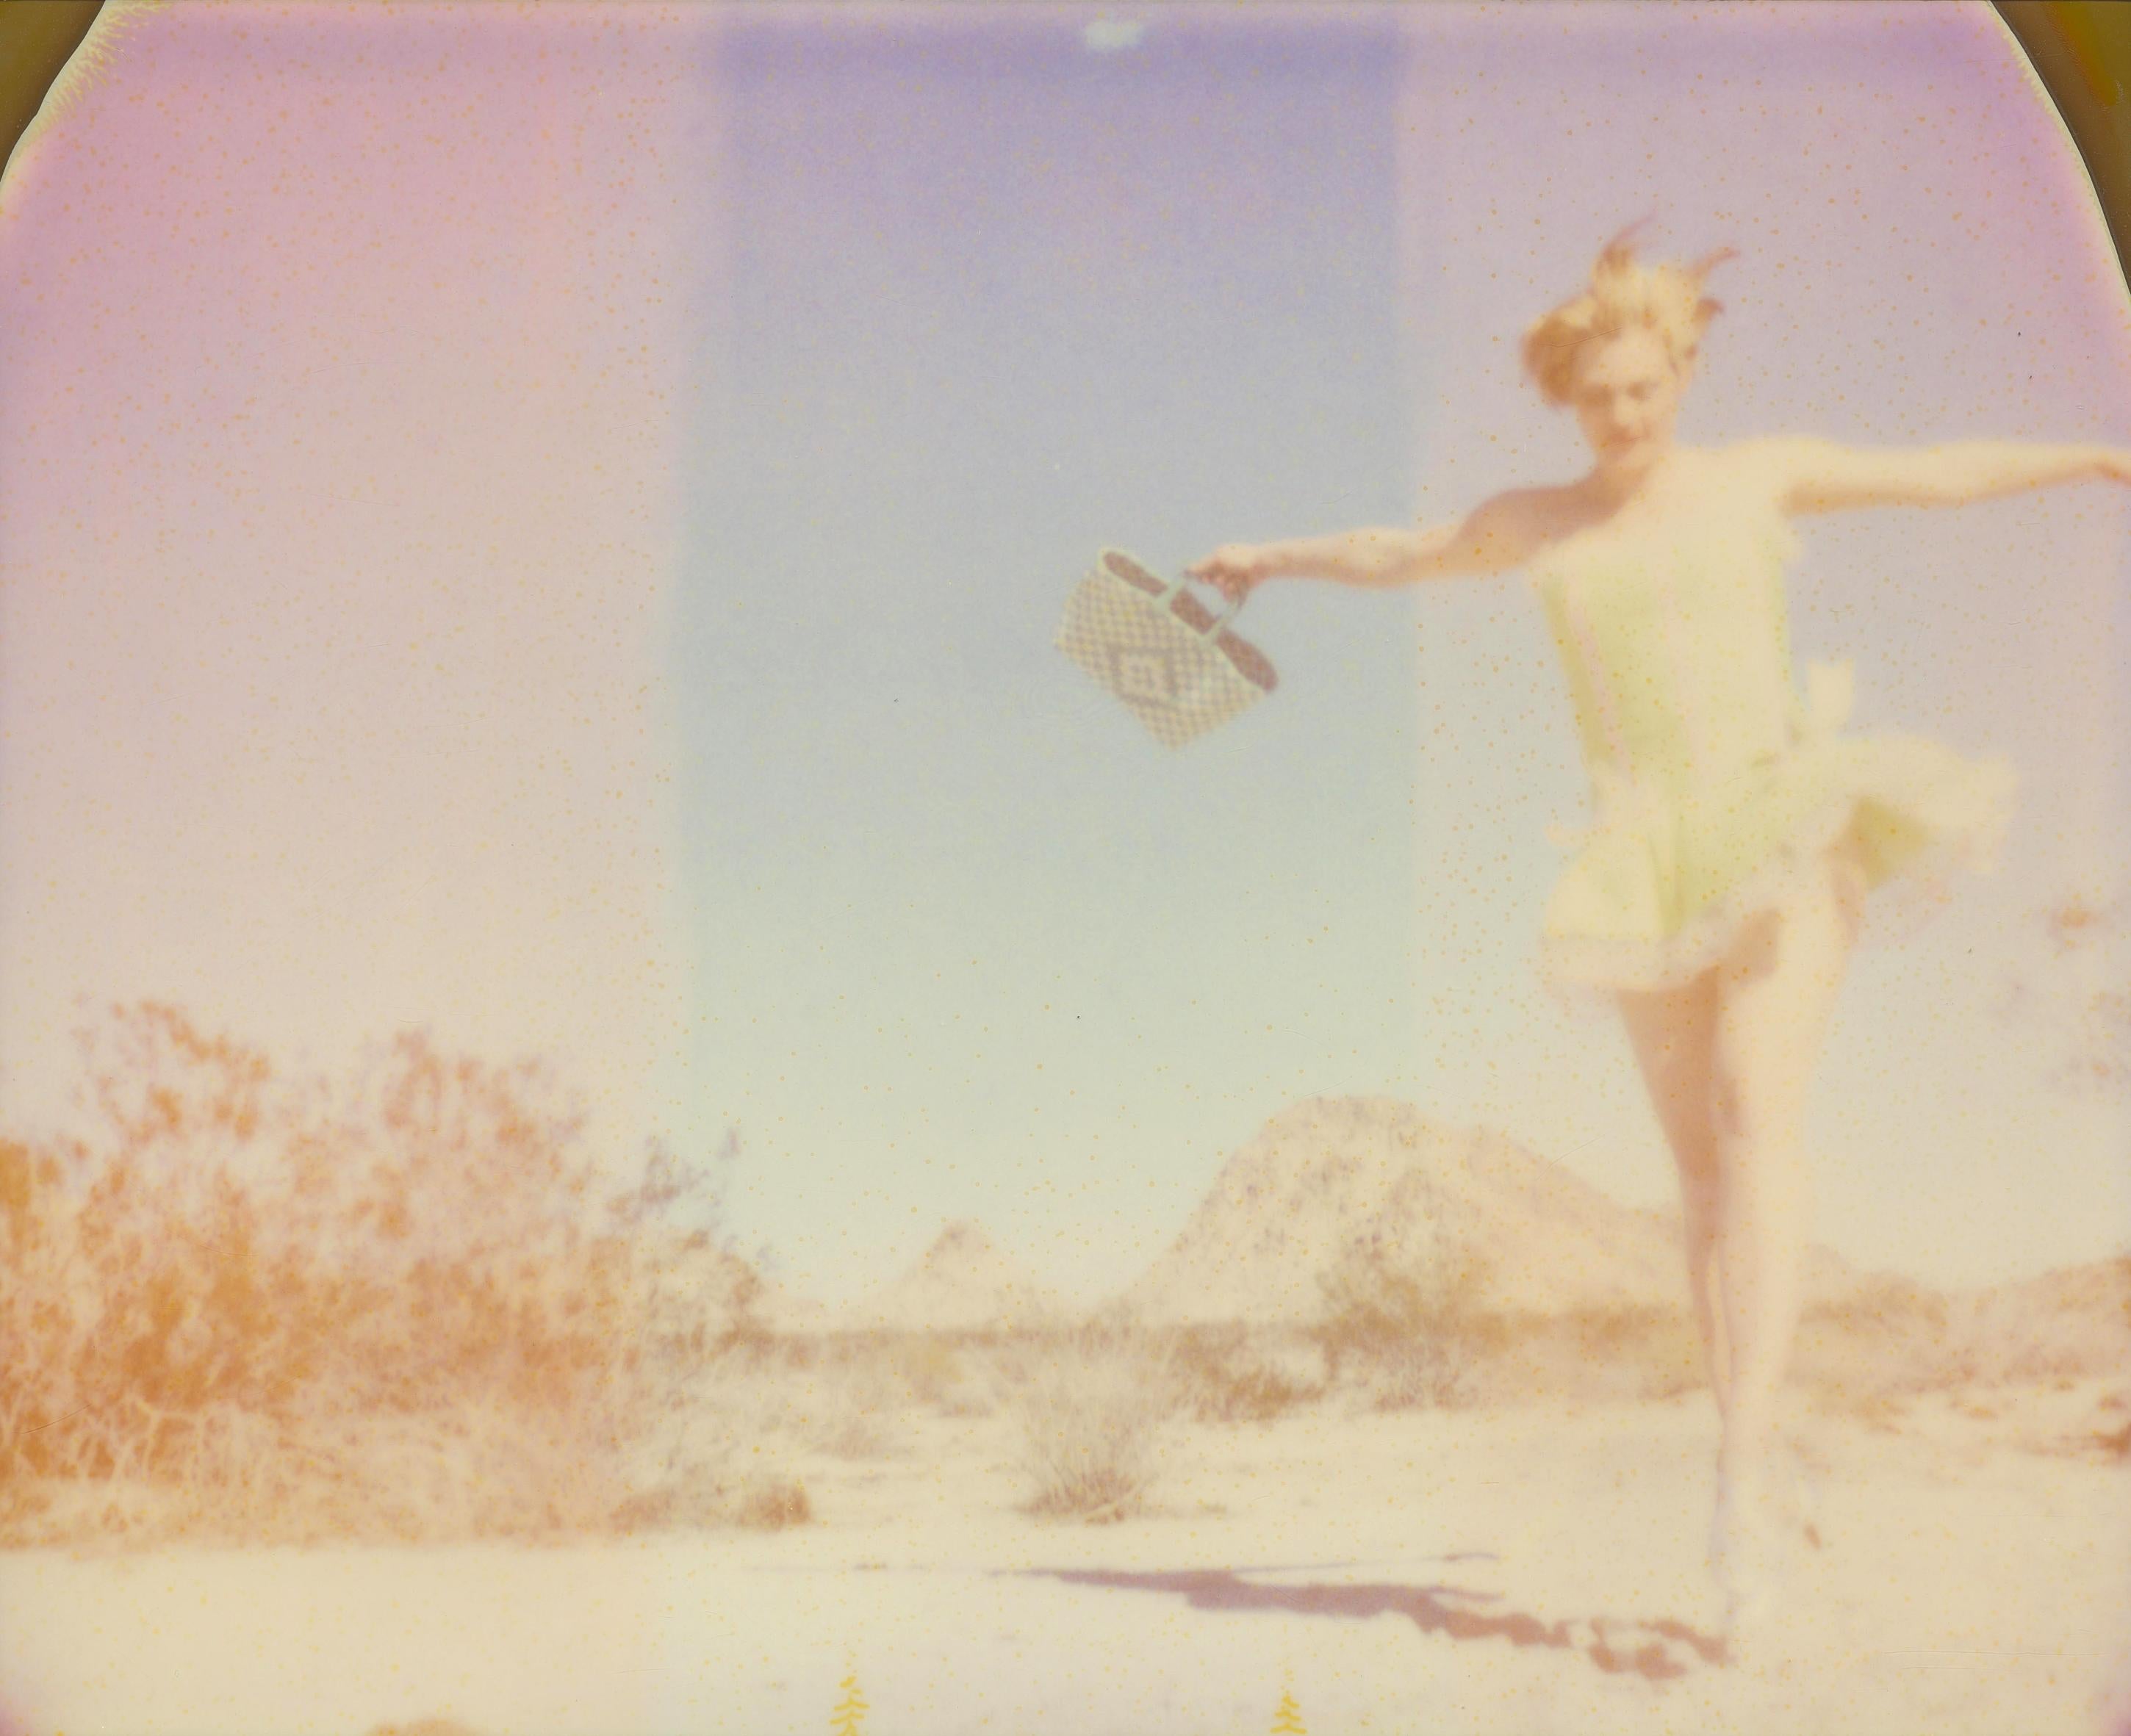 Stefanie Schneider Landscape Photograph - The Sound of Music (29 Palms, CA) - analog, mounted, based on a Polaroid